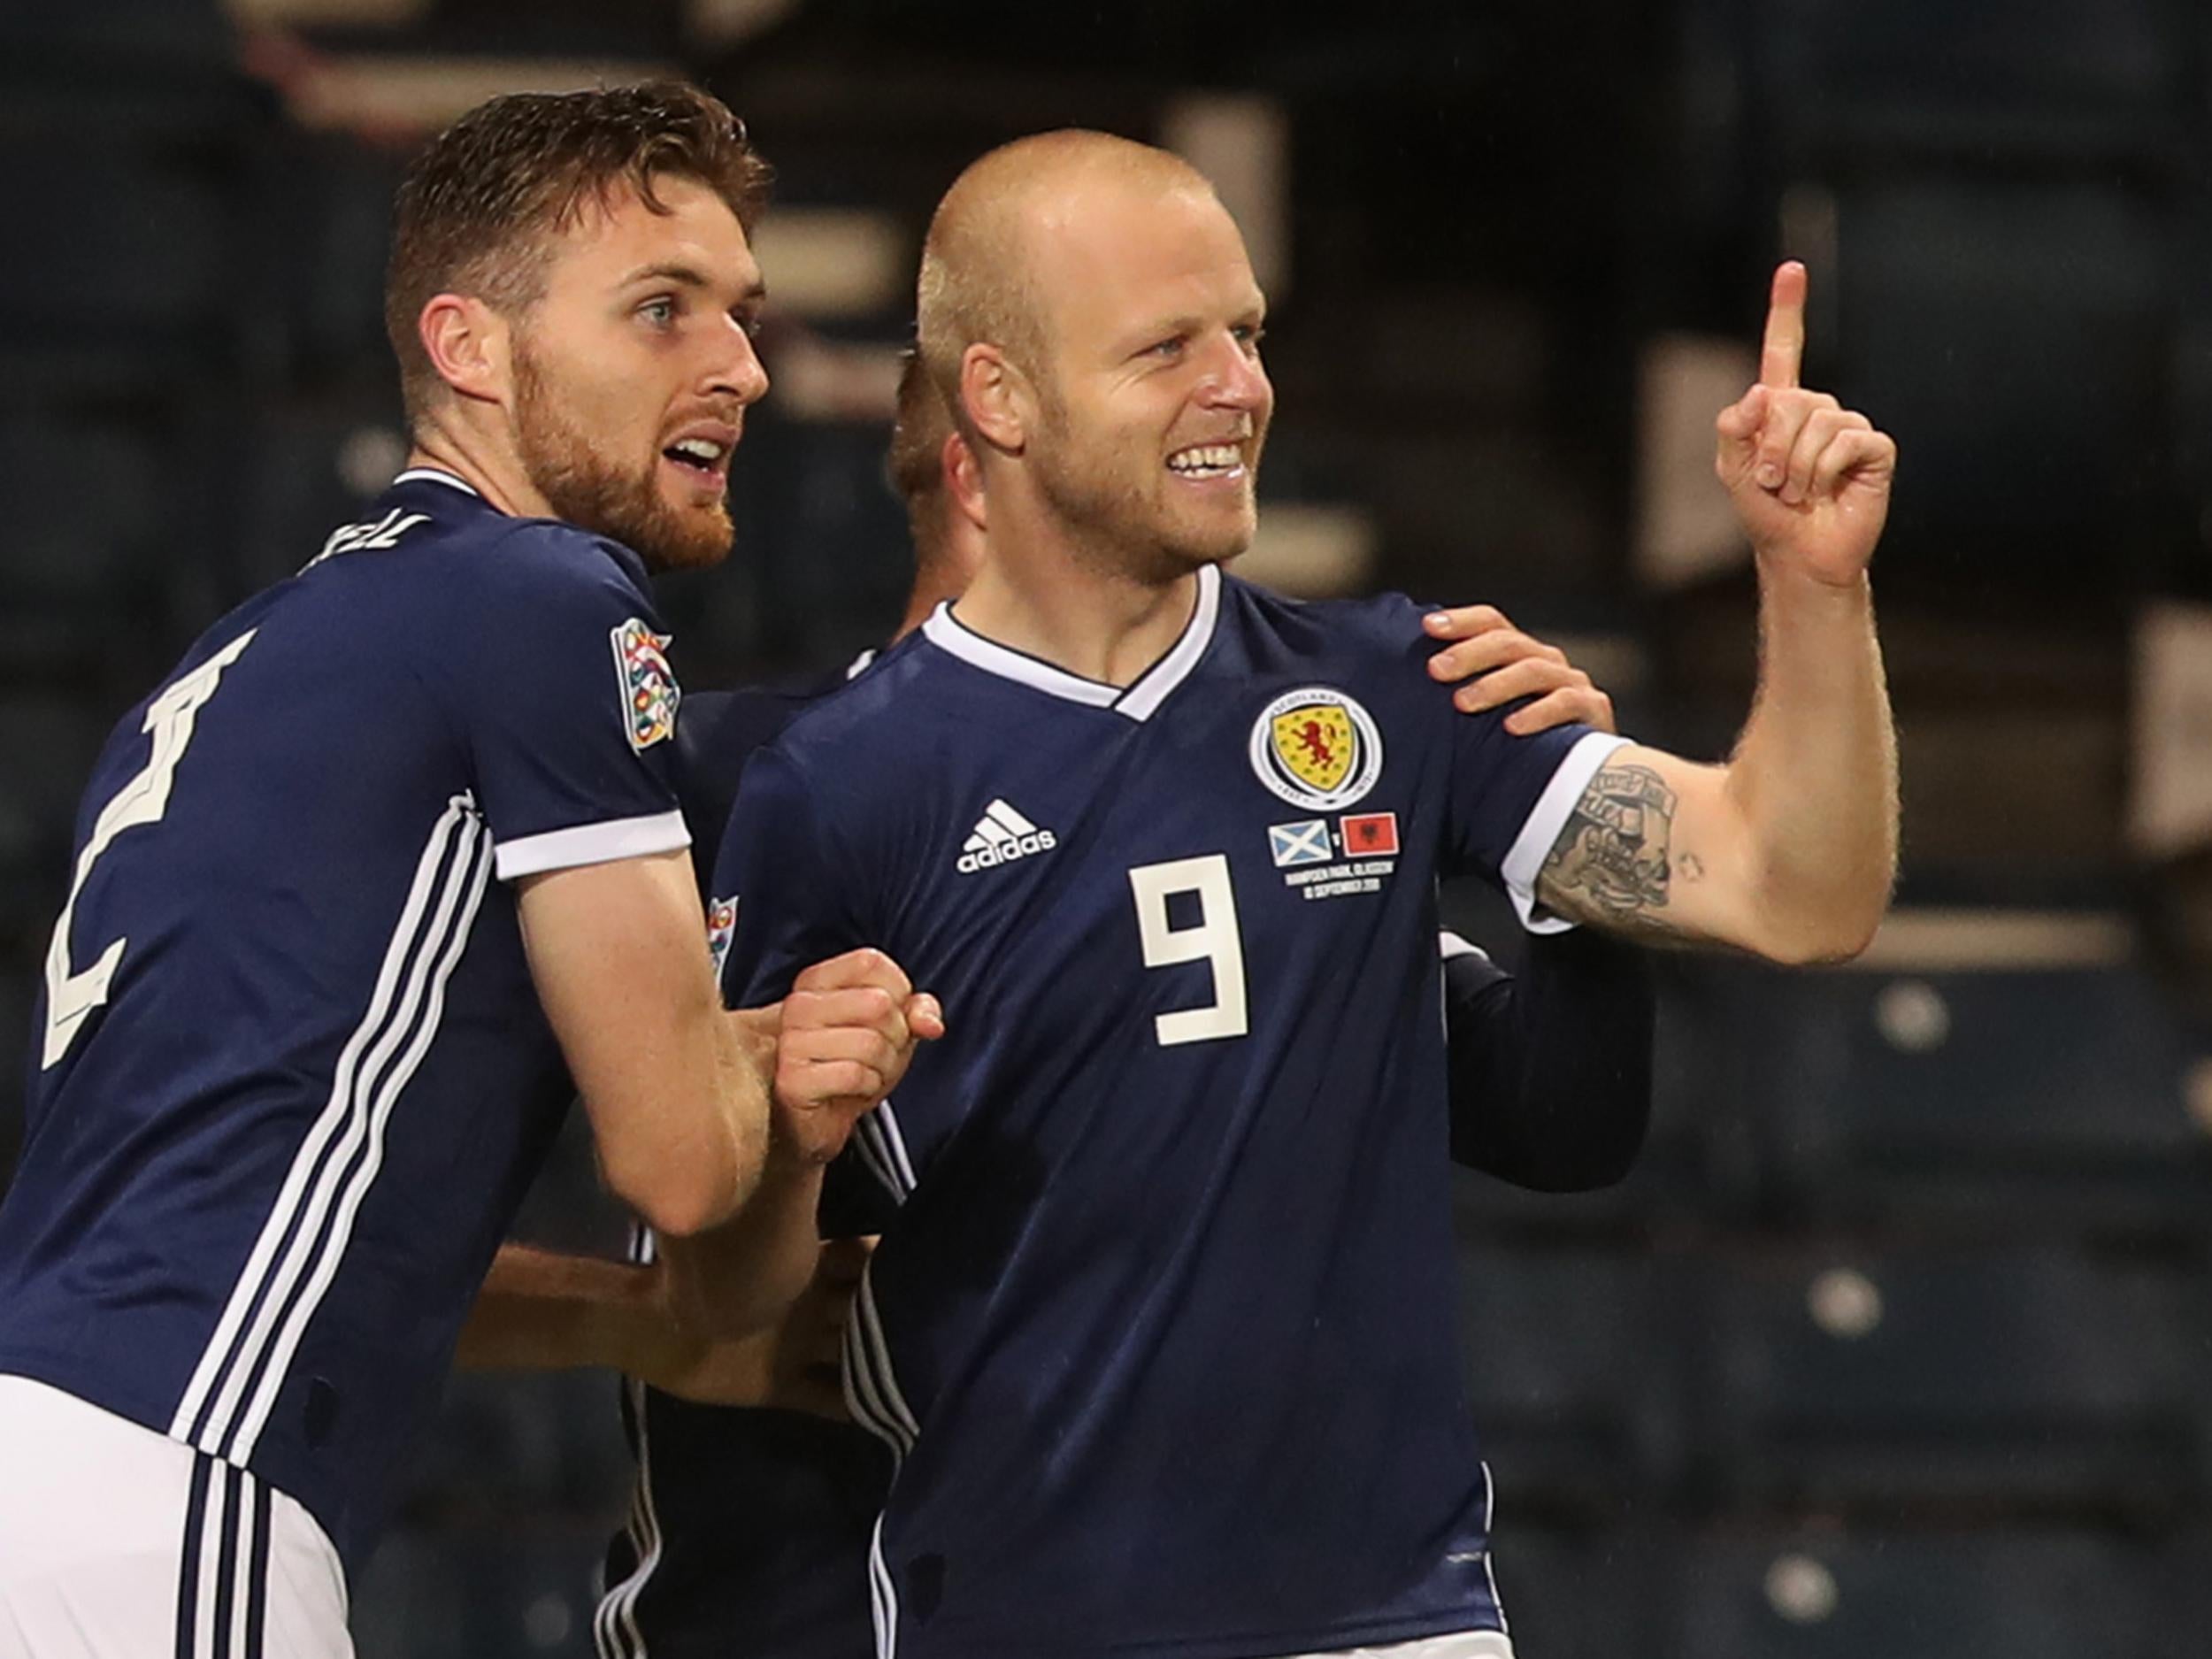 Low attendances and a poor atmosphere mean Scotland must consider leaving Hampden Park, says Steven Naismith